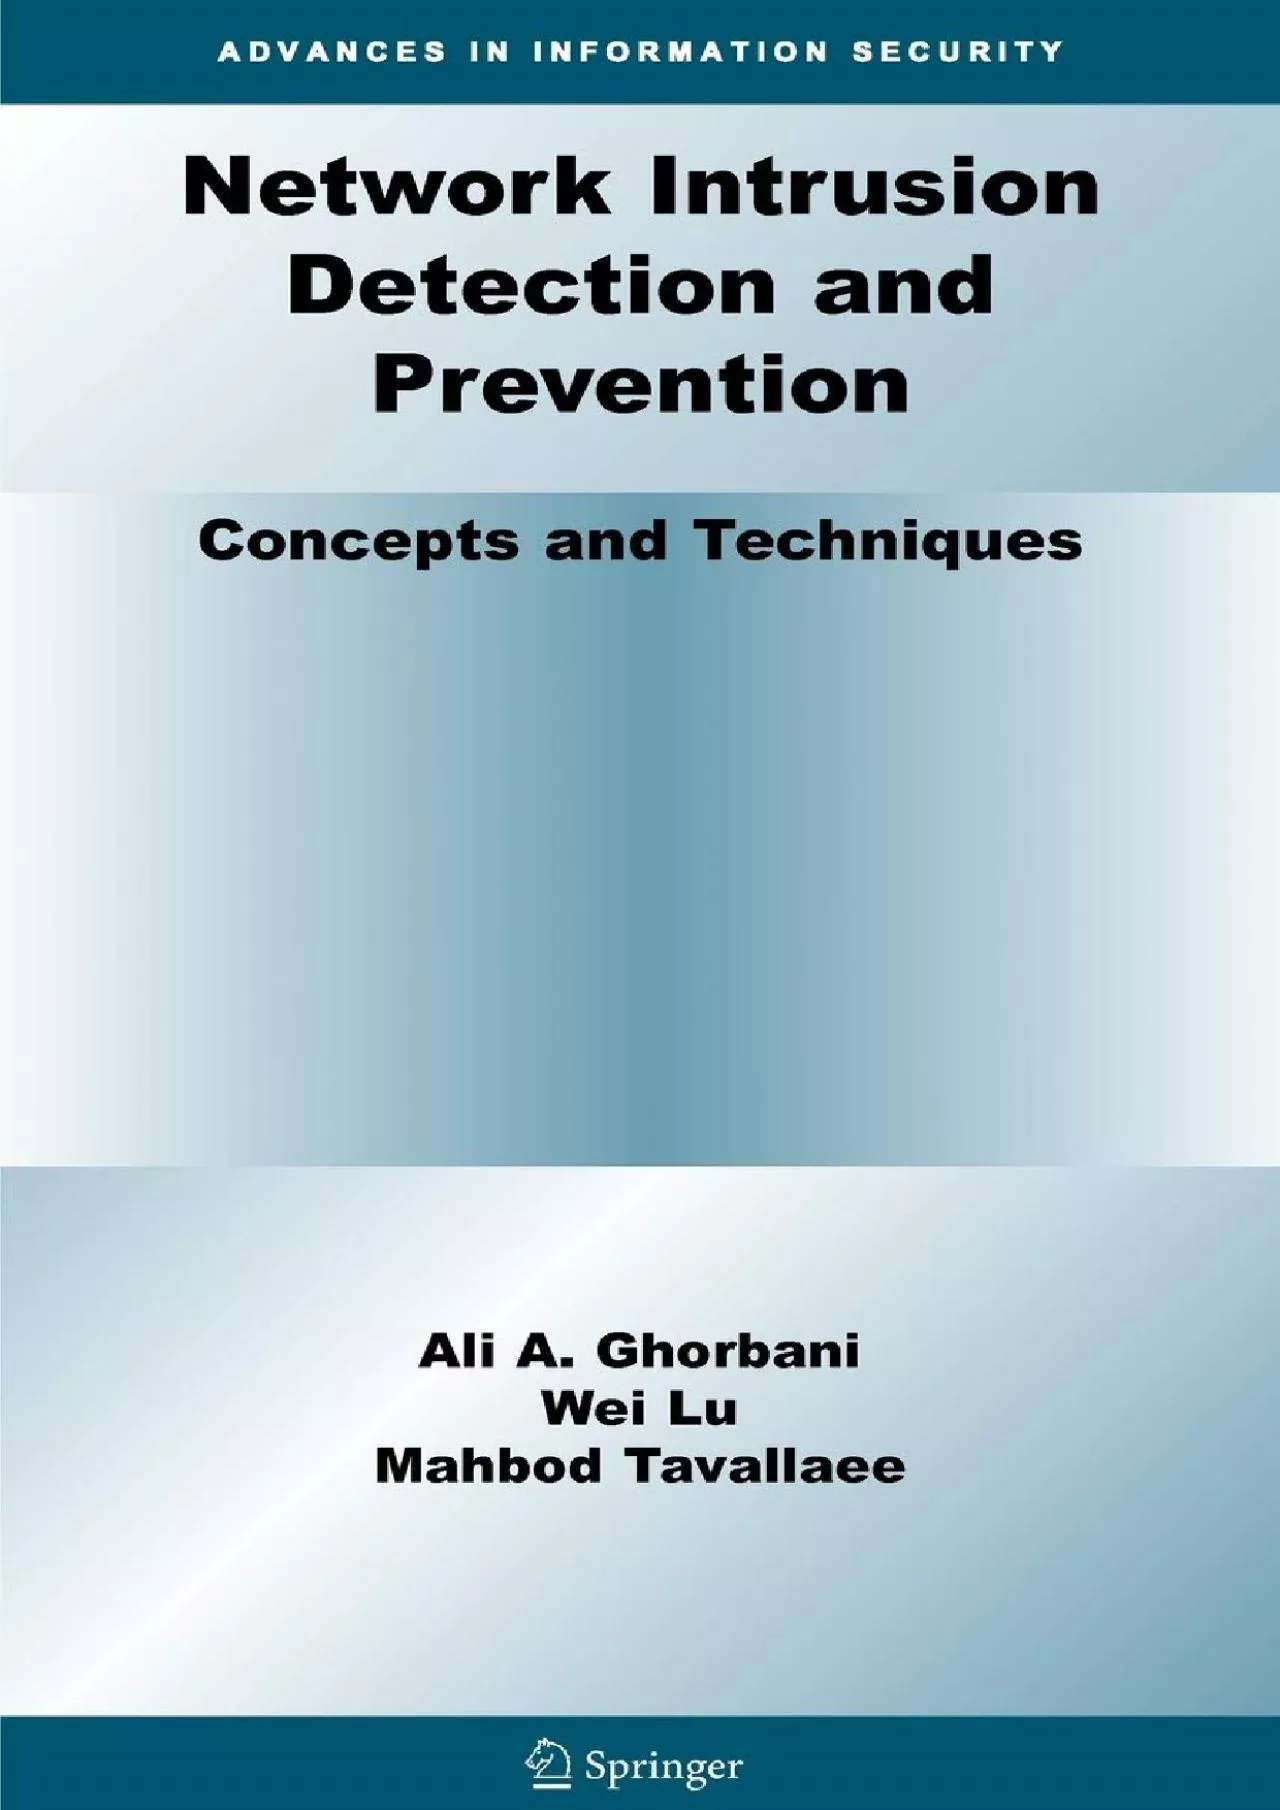 (BOOS)-Network Intrusion Detection and Prevention: Concepts and Techniques (Advances in